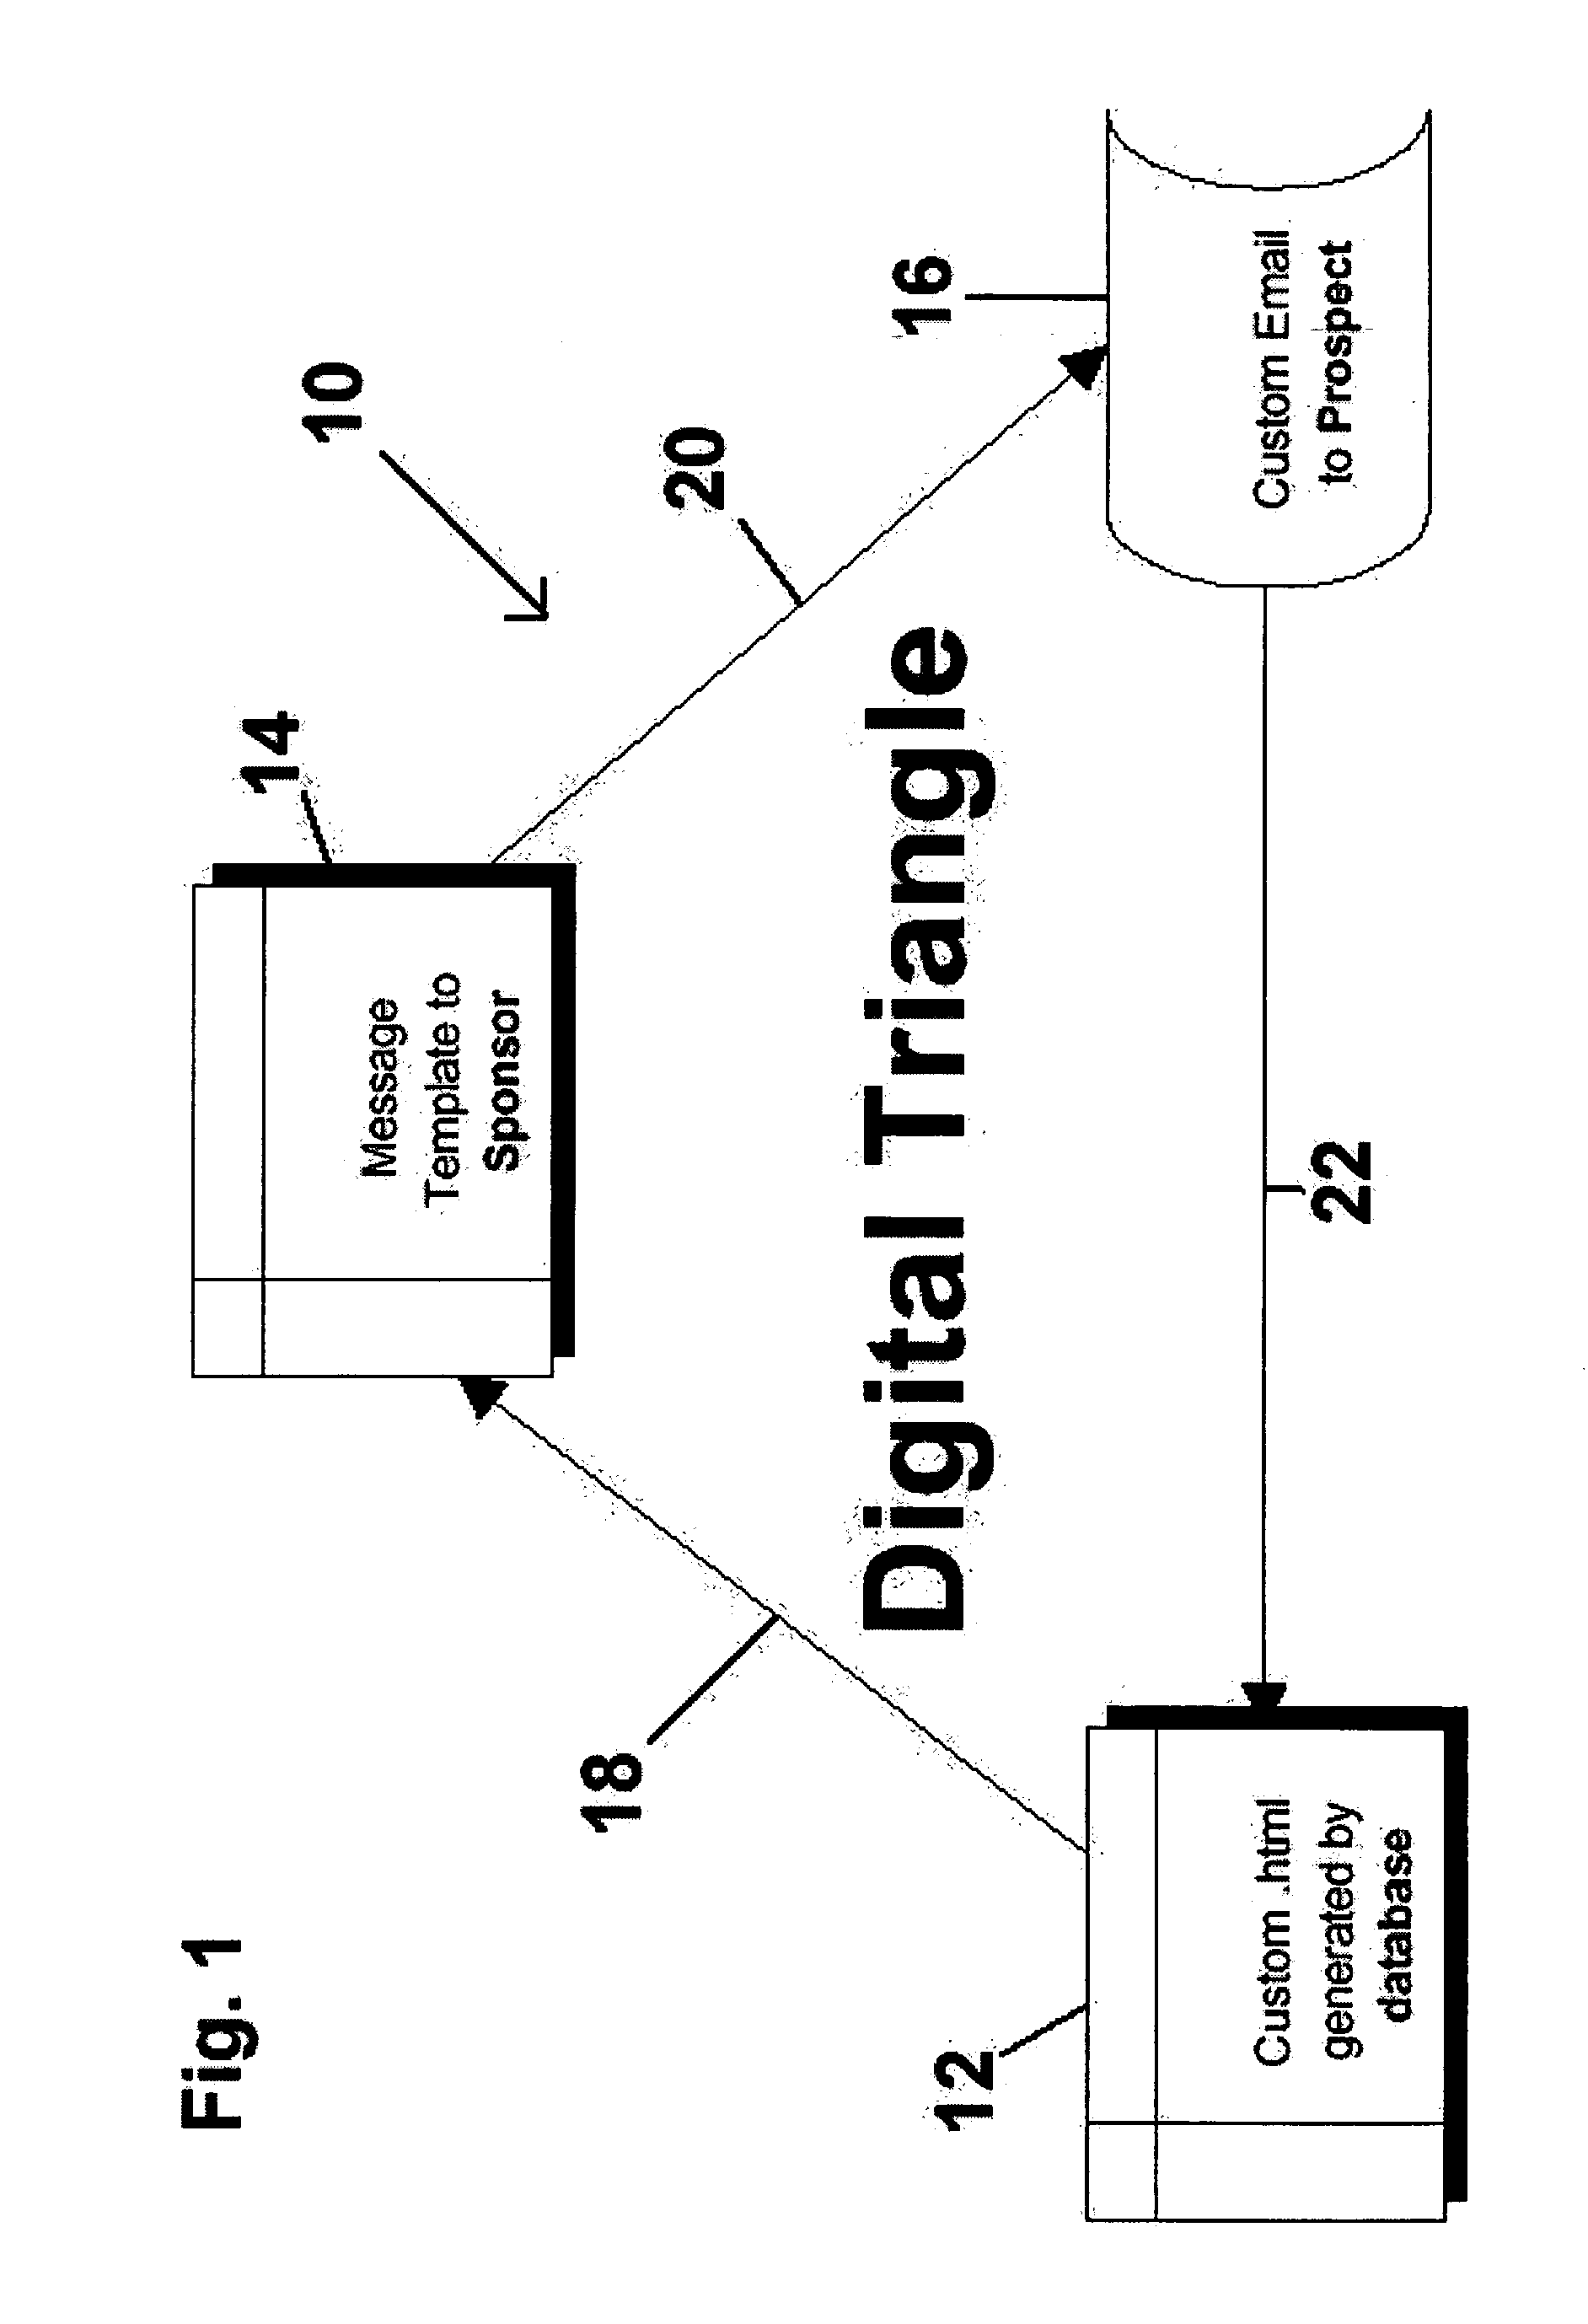 Method for automated electronic mail communication